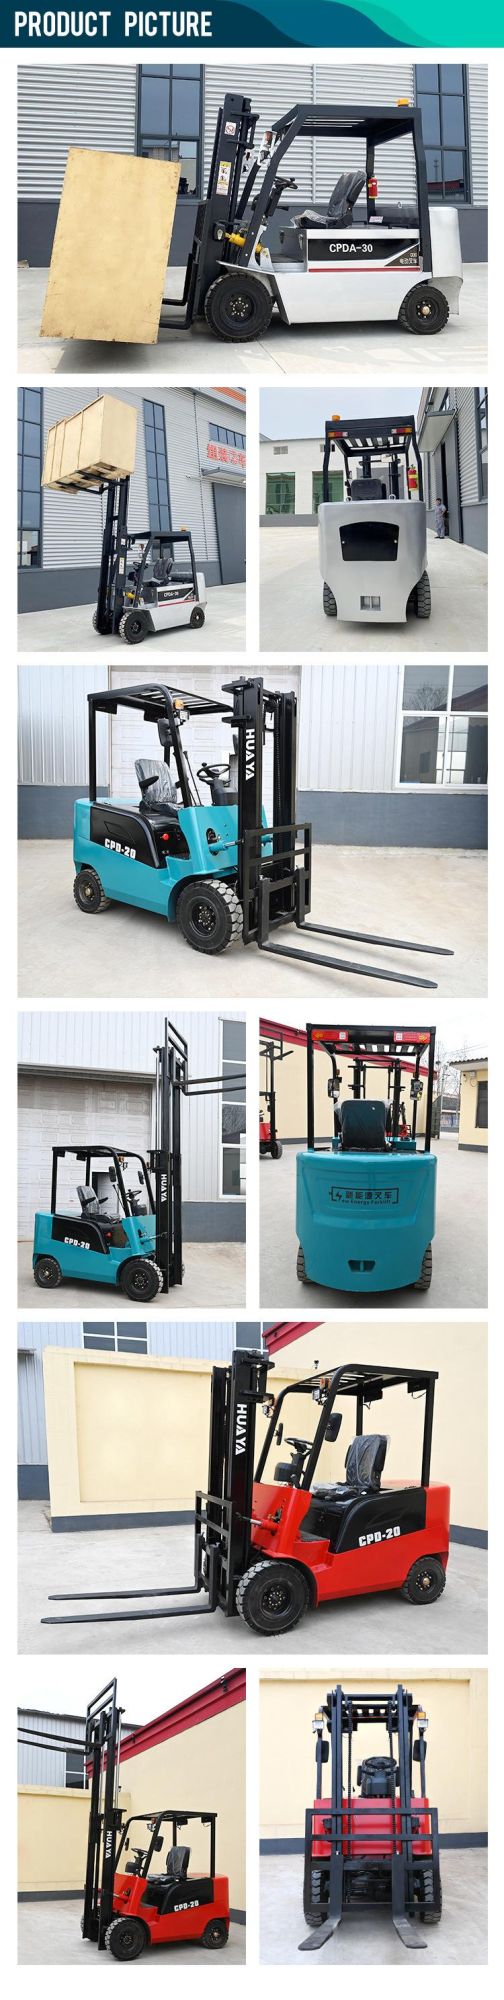 New Huaya China Small Hot Sale 2.5 Ton Electric Forklift